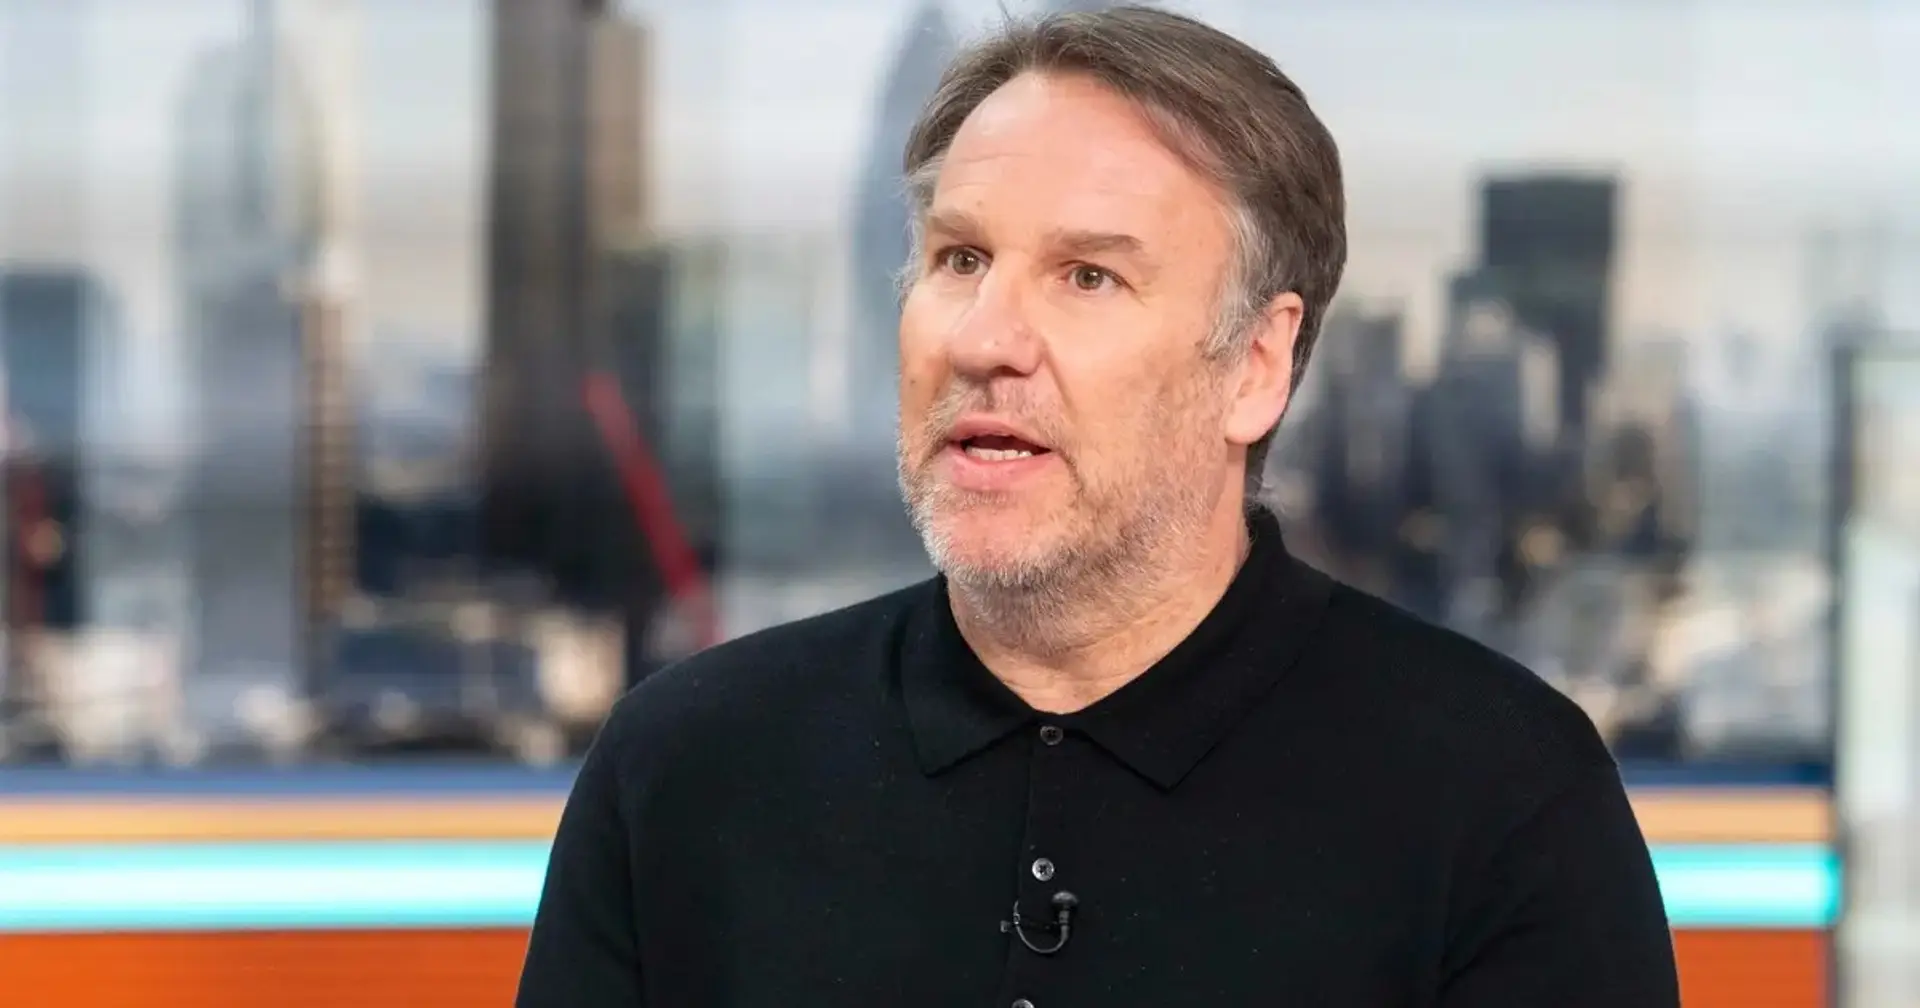 'It's an absolute waste of time': Merson explains why sin bins in football would be 'killing the game'